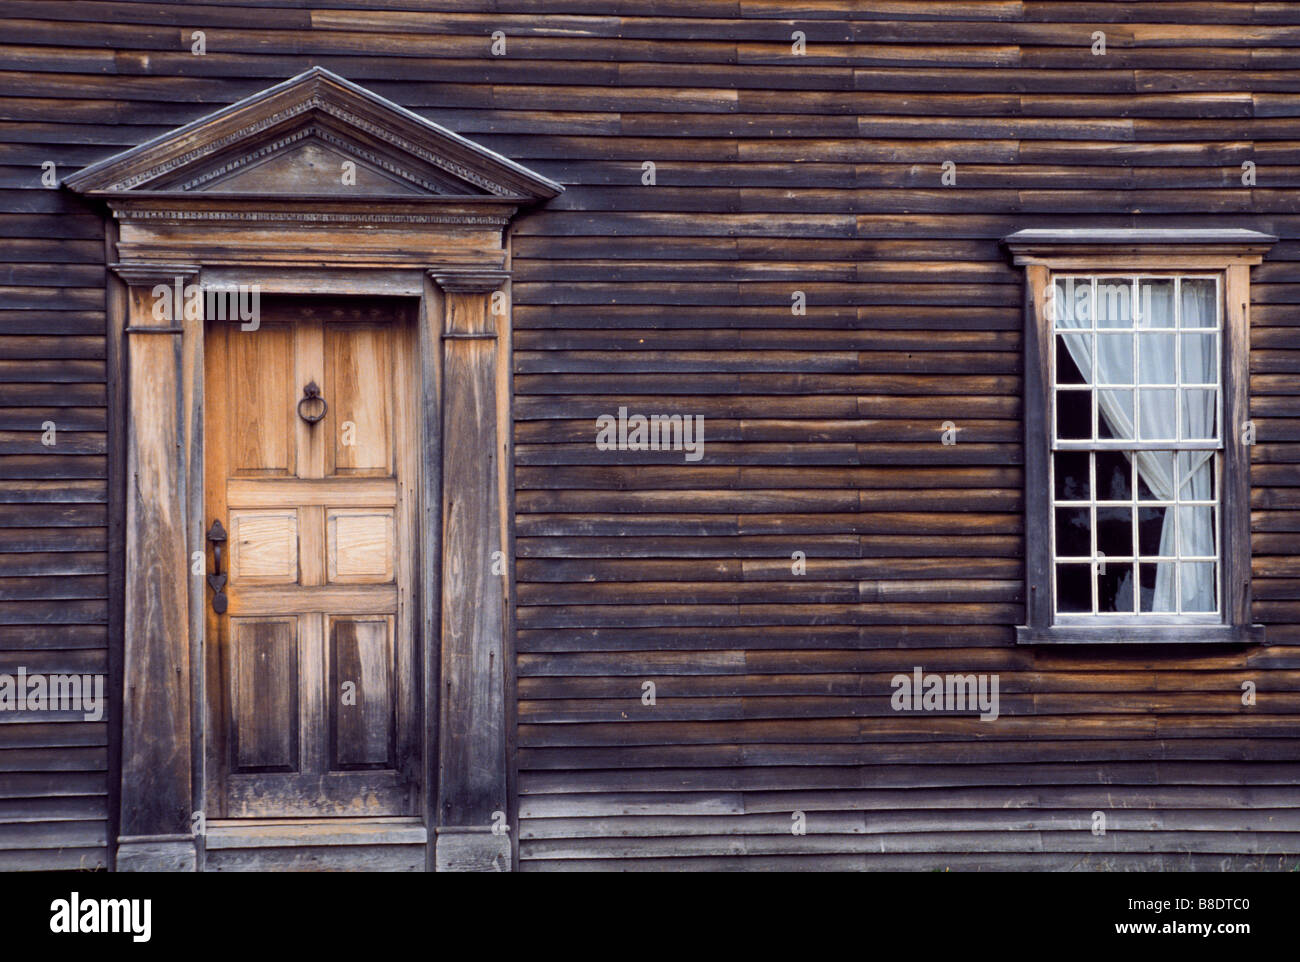 Birthplace of John Adams in Quincy formerly Braintree Massachusetts. Photograph Stock Photo